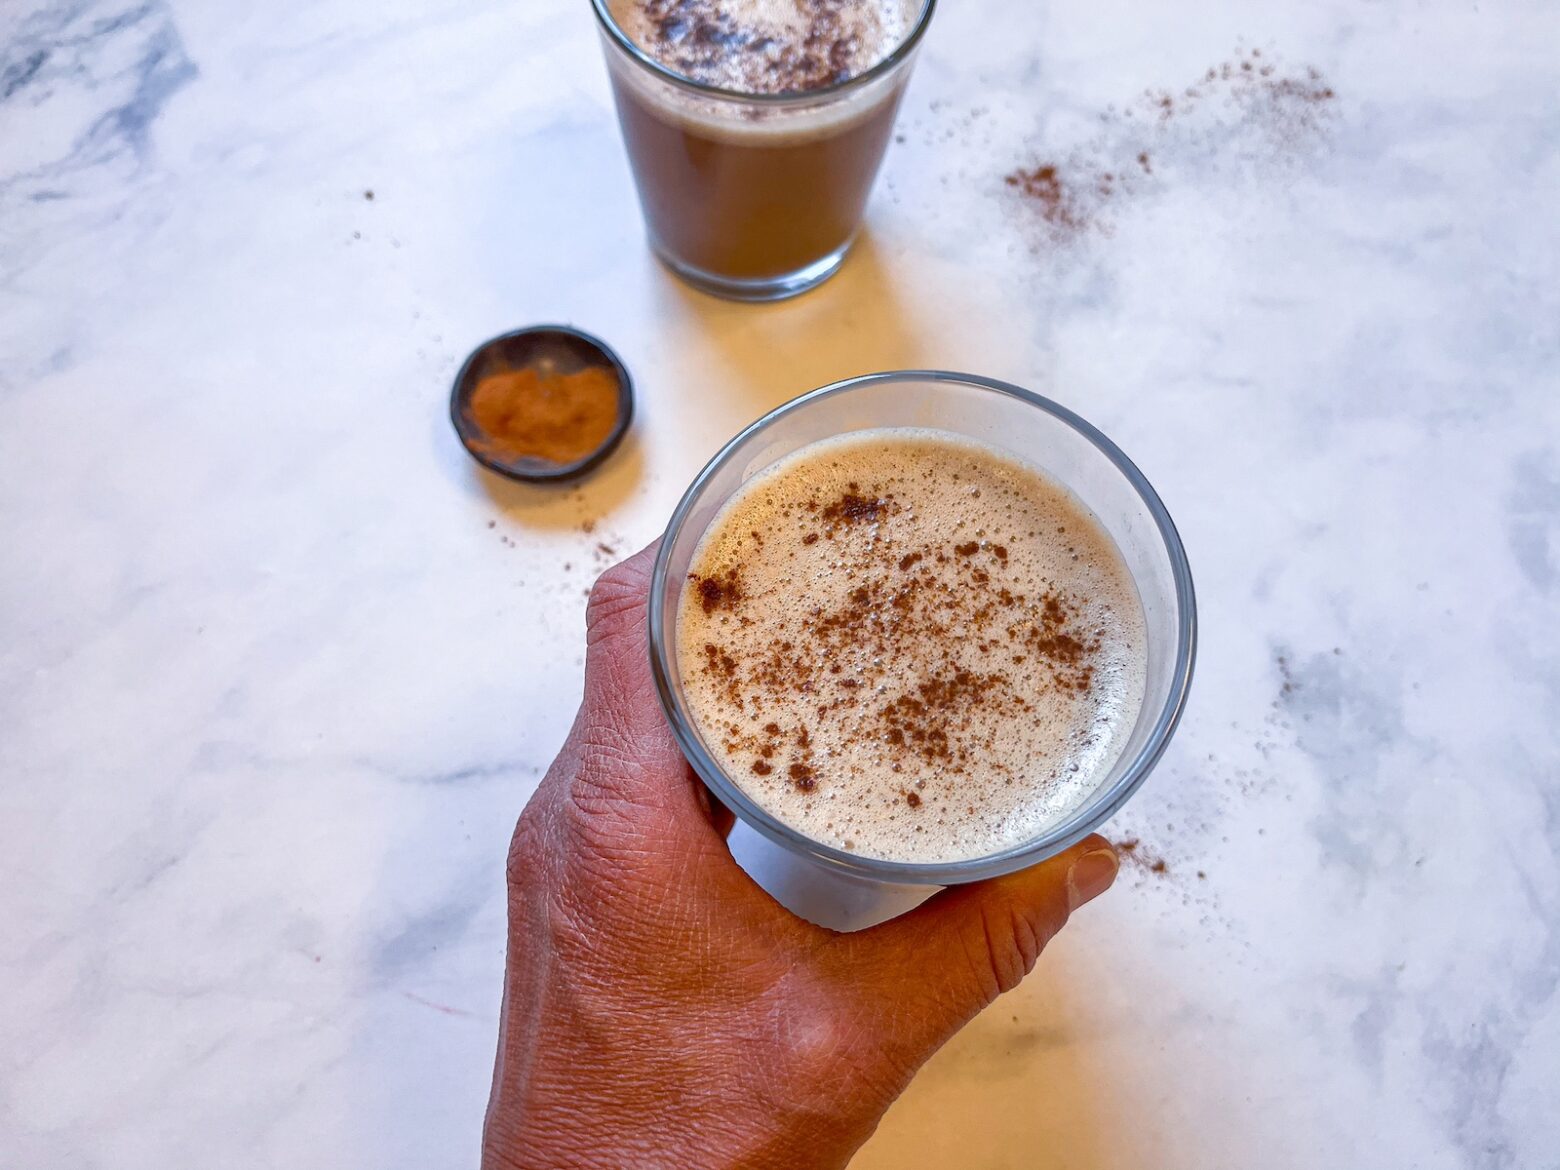 Cacao reishi latte in a glass with a hand around it.